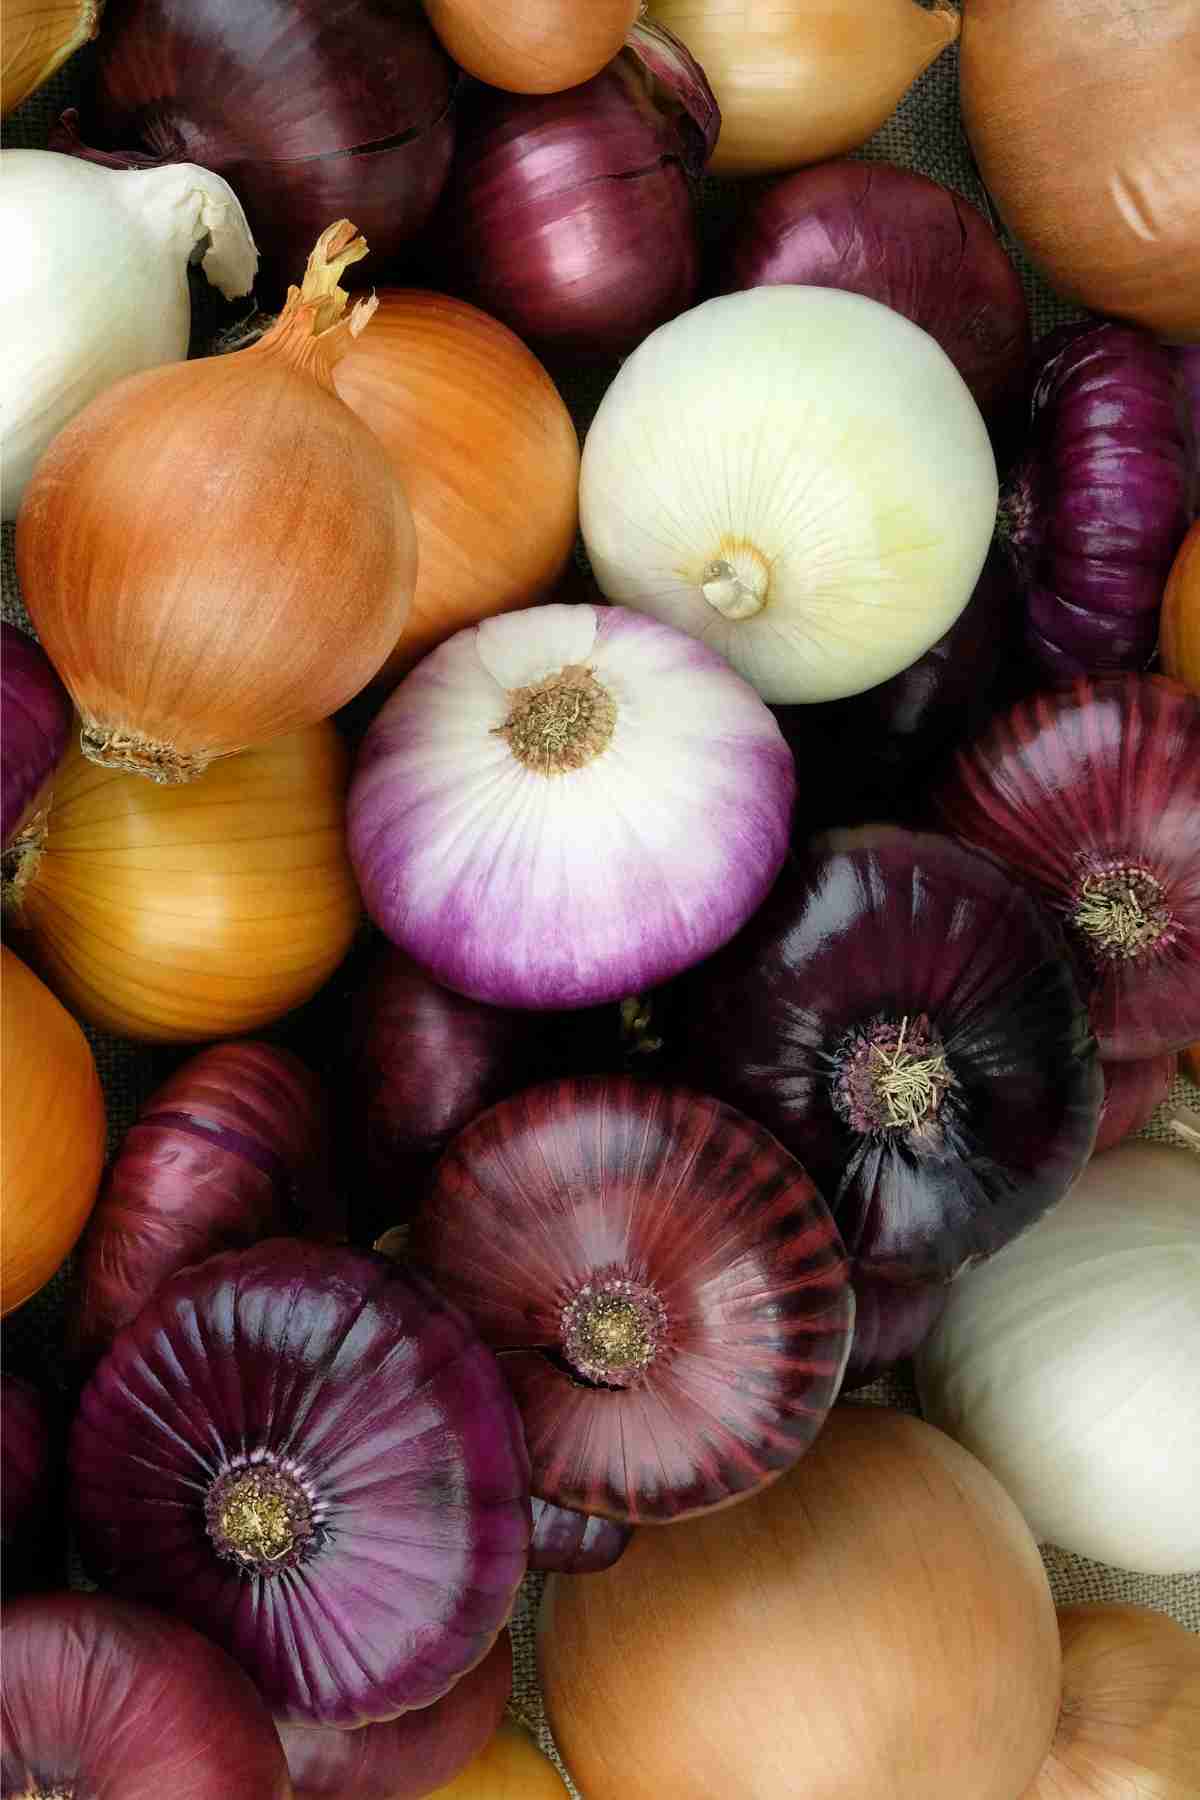 Are Raw Onions Good For You? 8 Health Benefits of Onions